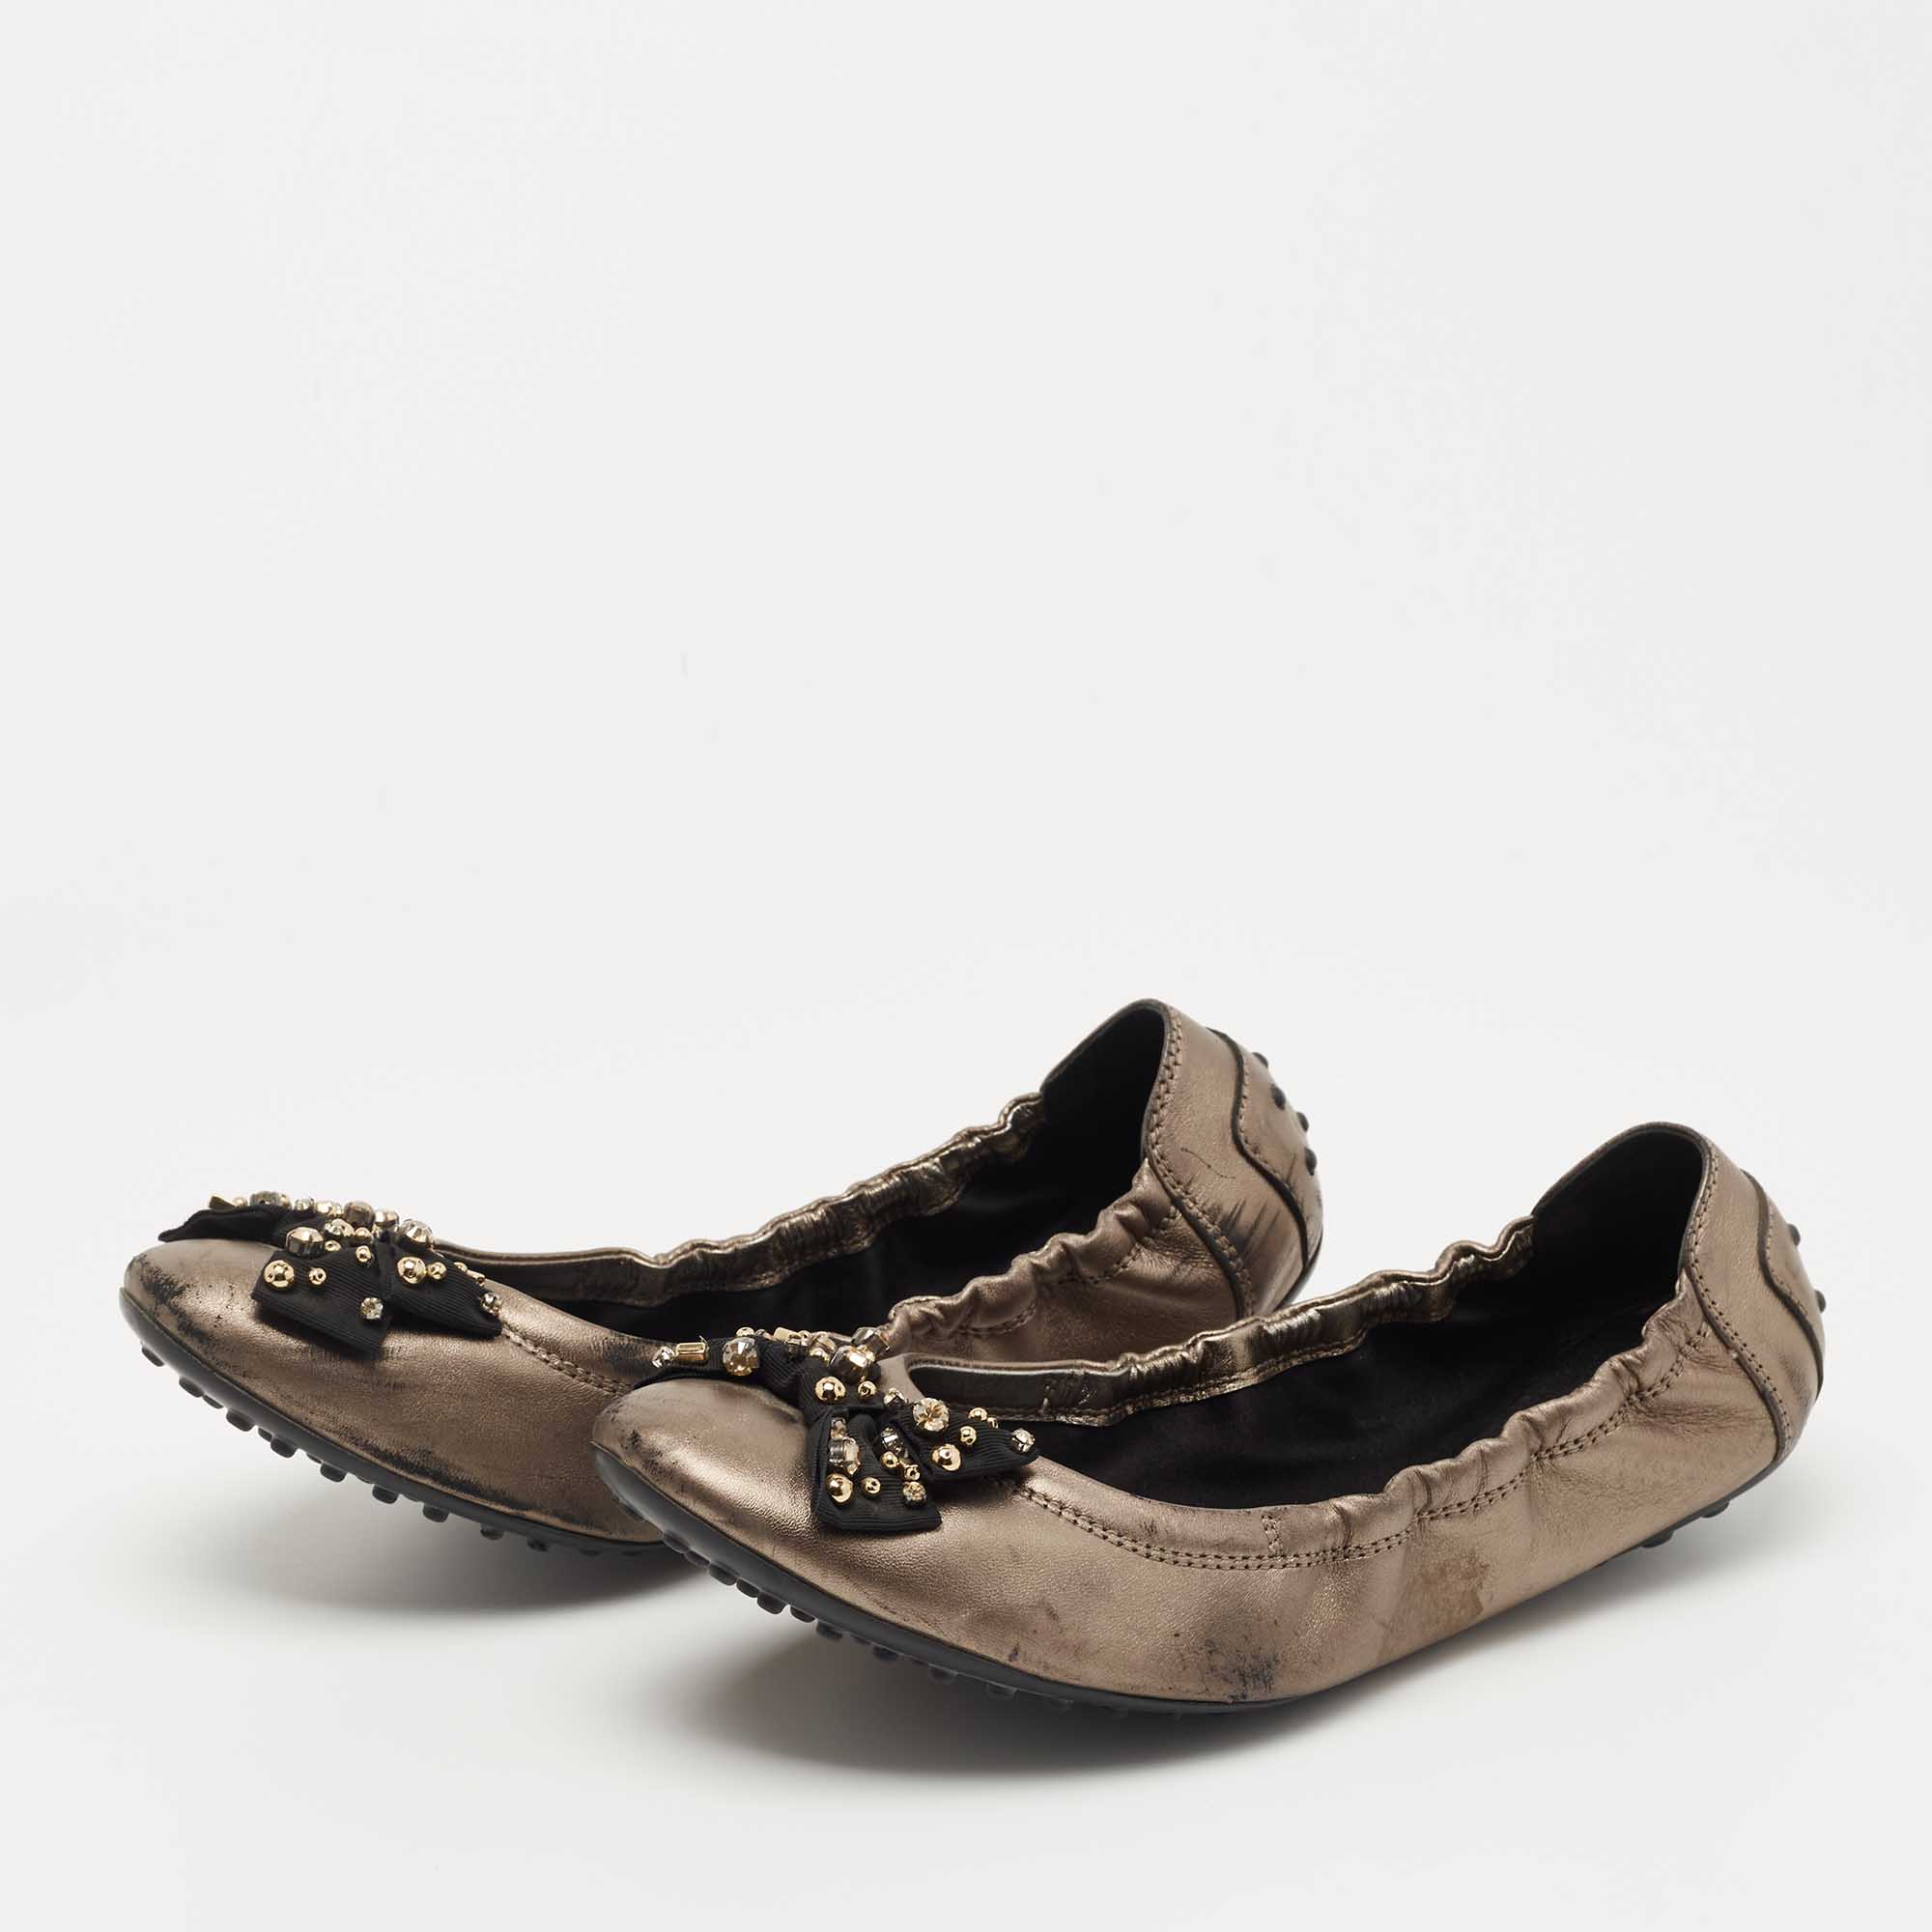 

Tod's Metallic Leather Crystal Embellished Bow Scrunch Ballet Flats Size